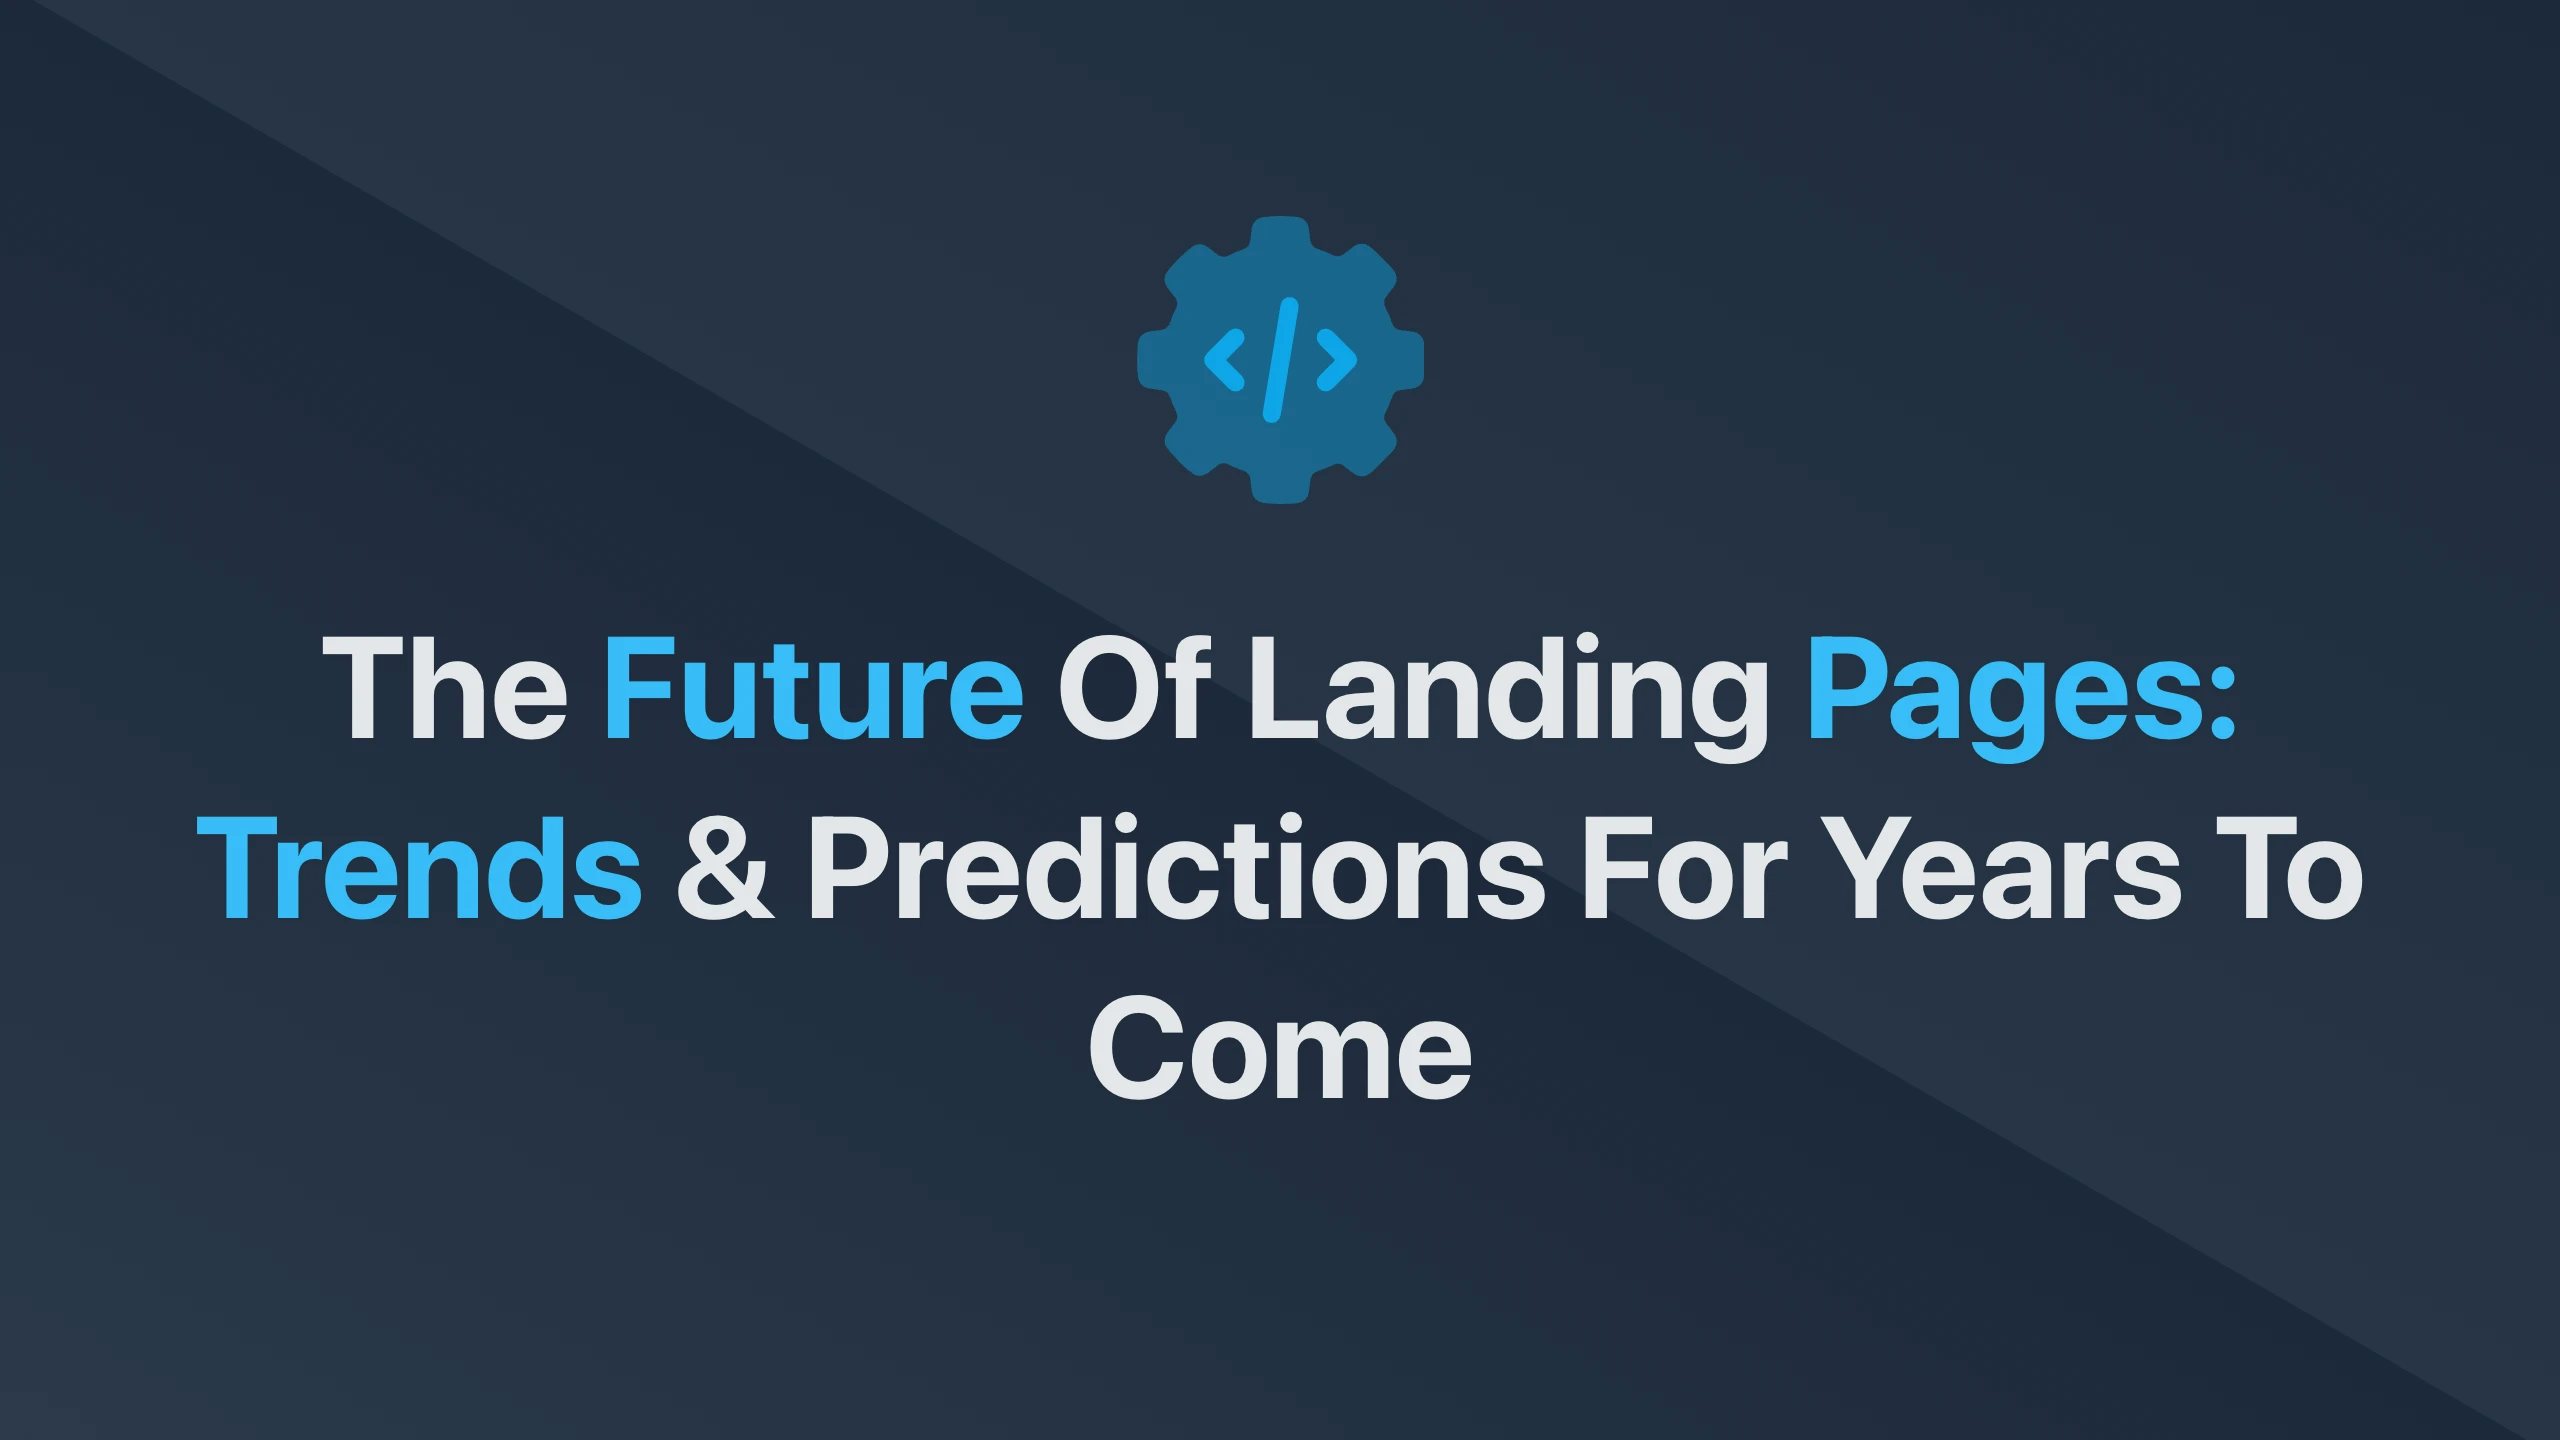 Cover Image for The Future of Landing Pages: Trends & Predictions for Years to Come